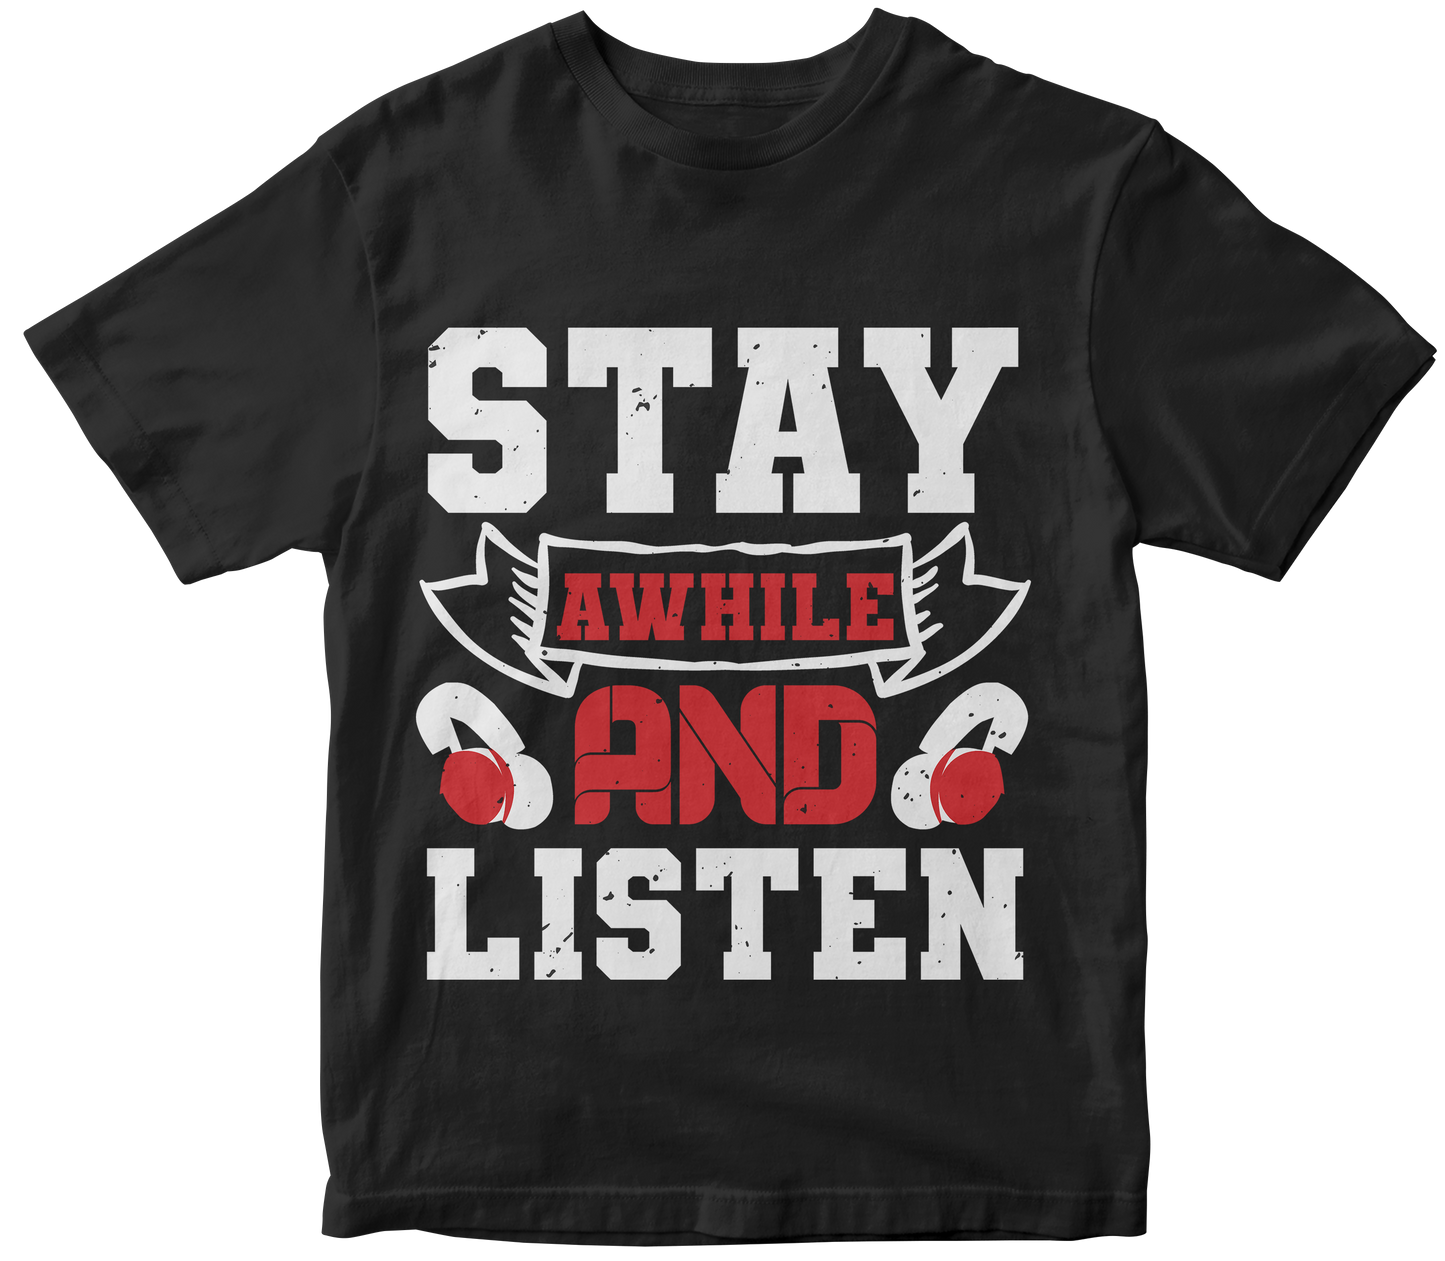 Stay awhile, and listen!